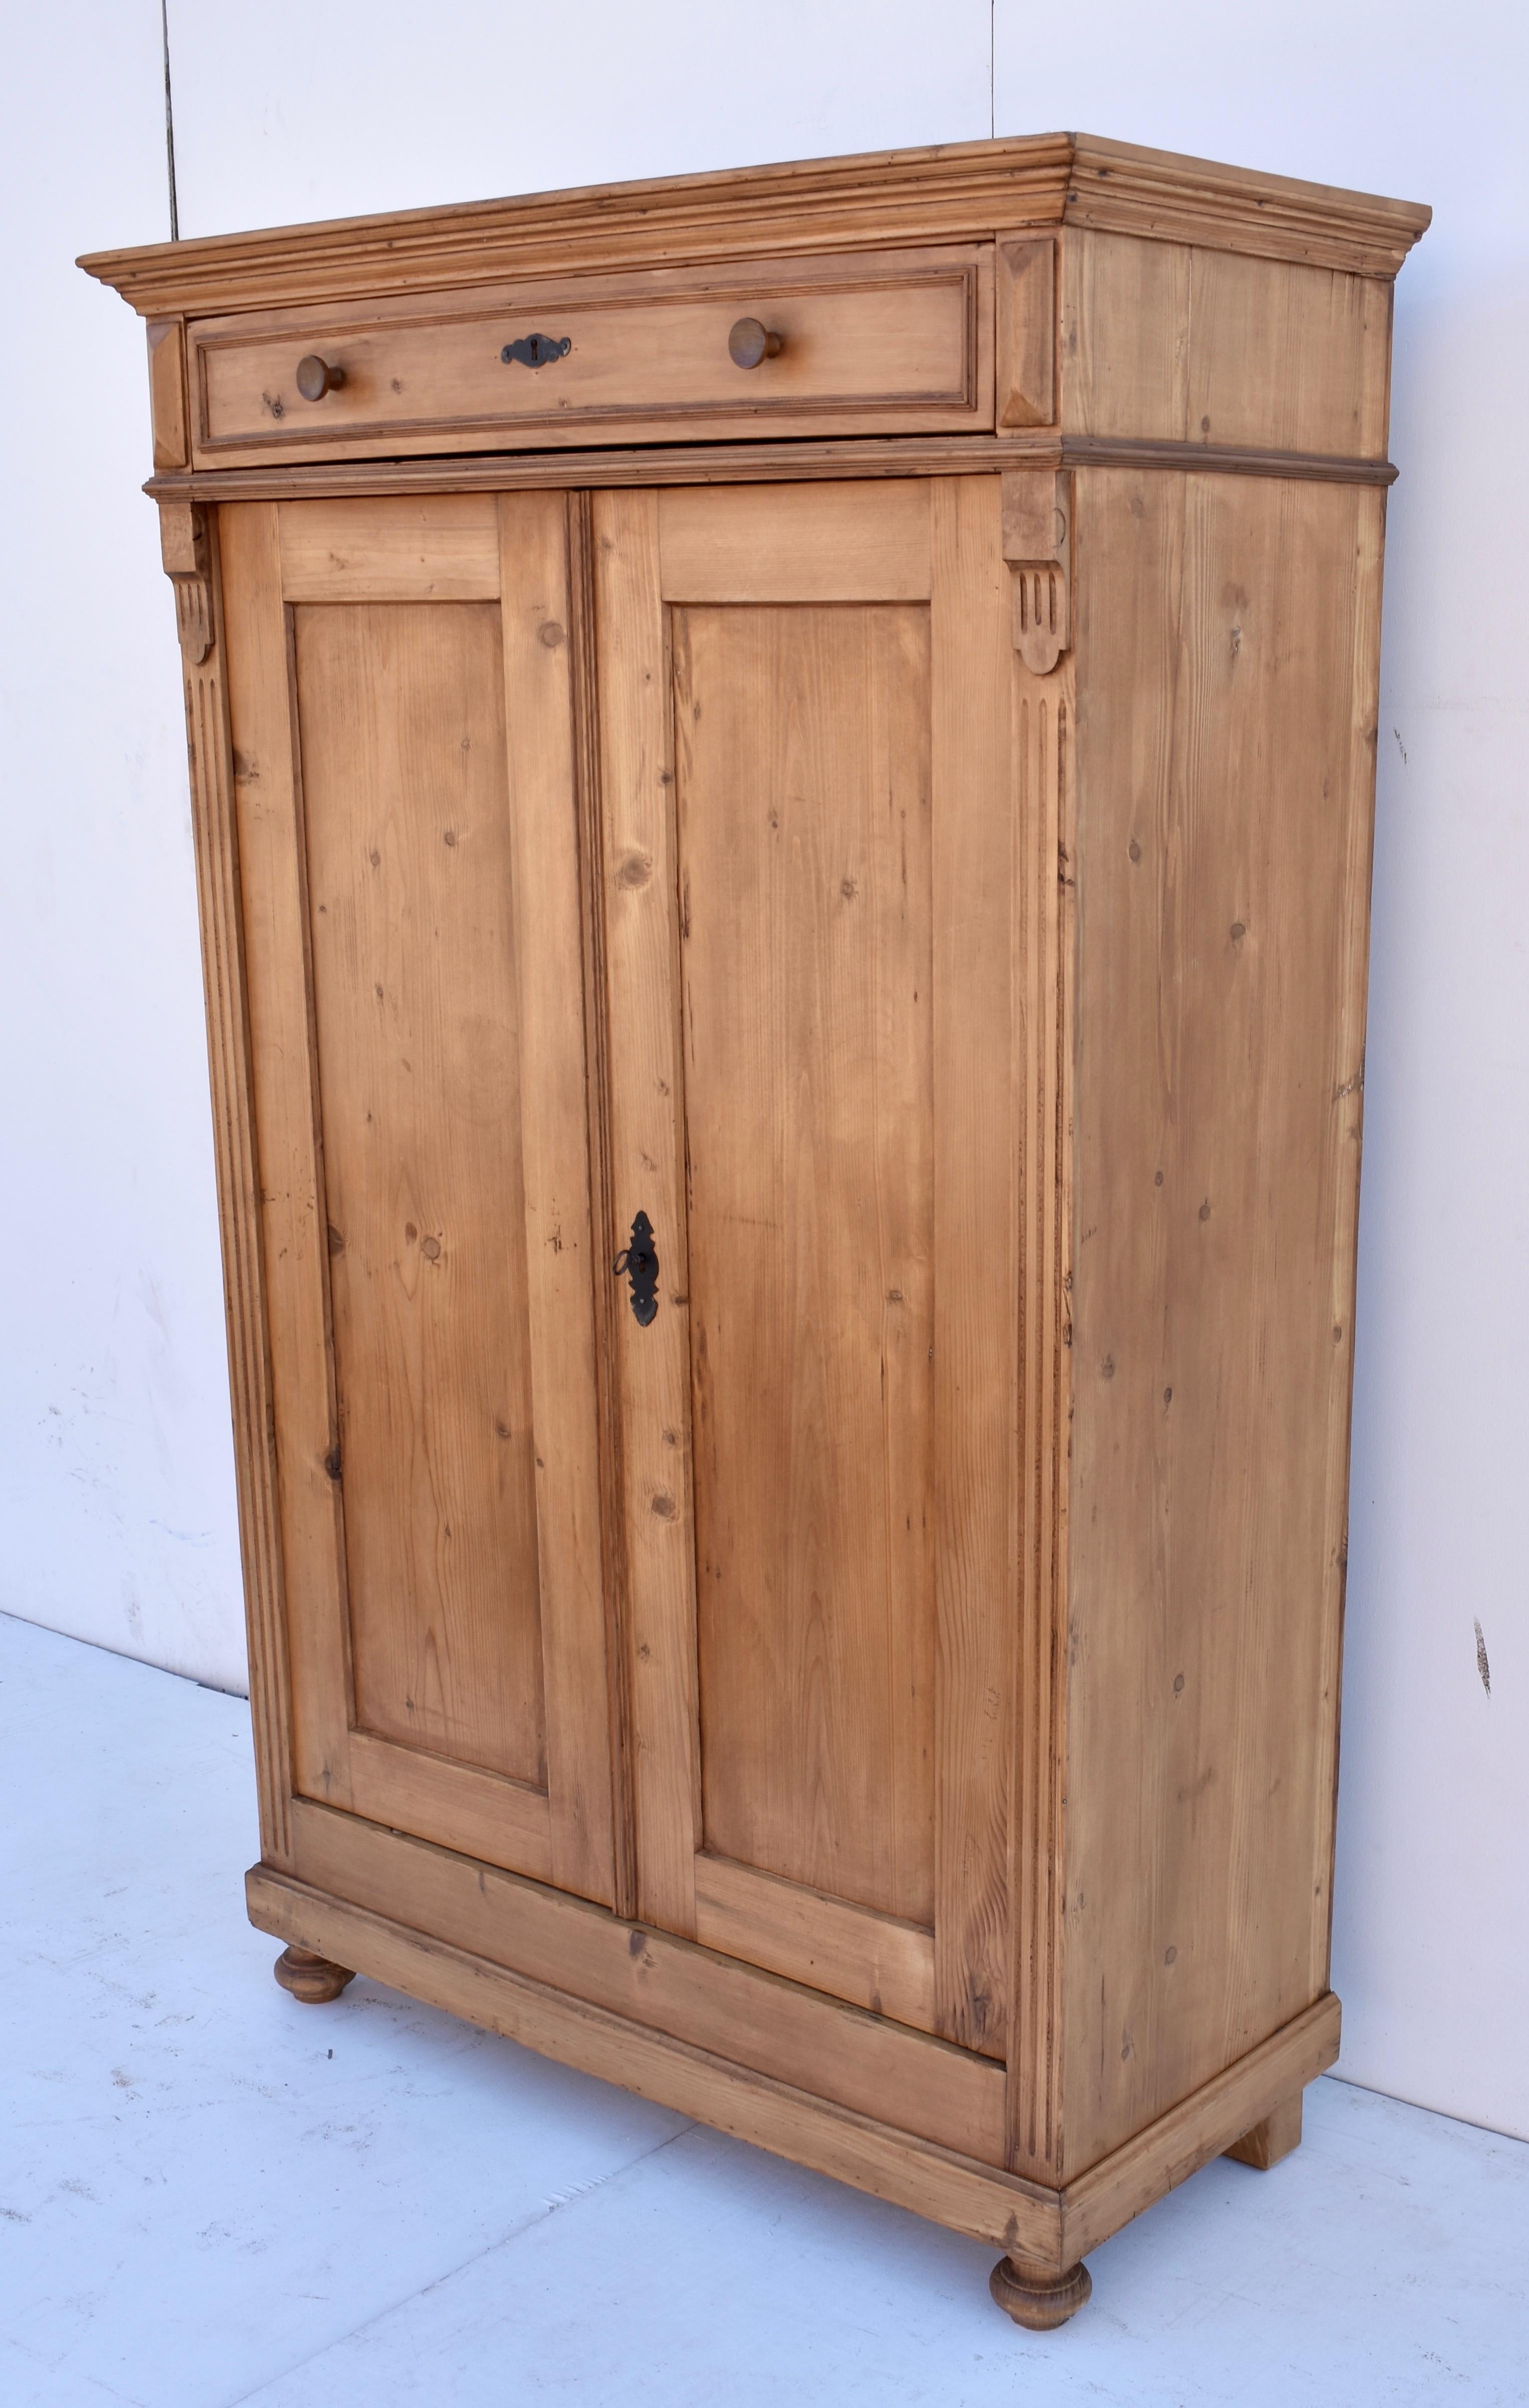 This handsome piece is configured like a “vertigo” or vertical cabinet, with a shallow hand-cut dovetailed drawer above two flat paneled doors. It has been used as a small wardrobe, fitted with a pole on which hangers can be accommodated by hanging